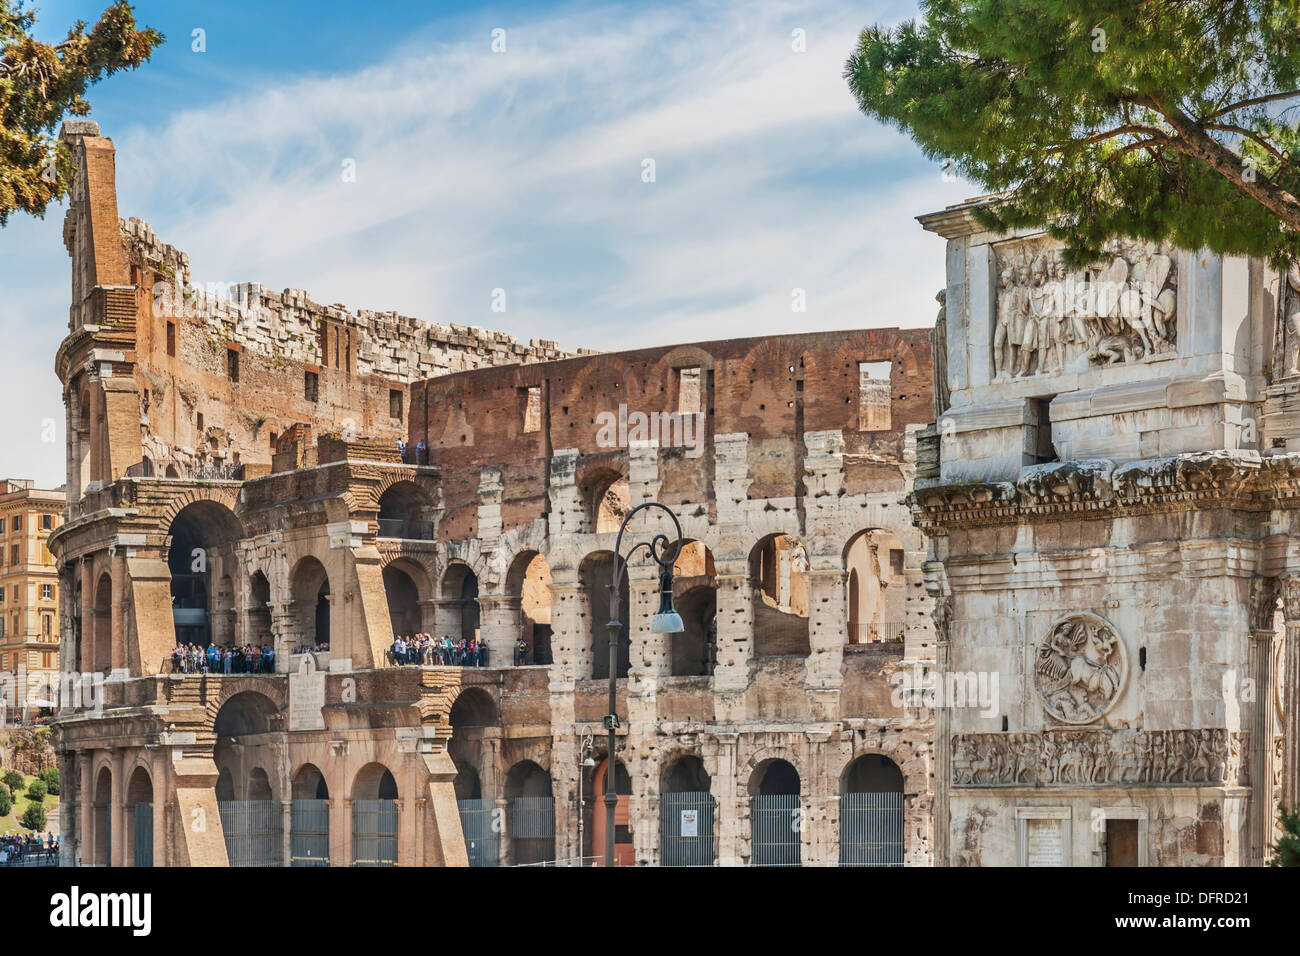 Arch of Constantine (Arco di Costantino) is located in front of the Colosseum. It was built from 312 to 315, Rome, Italy, Europe Stock Photo